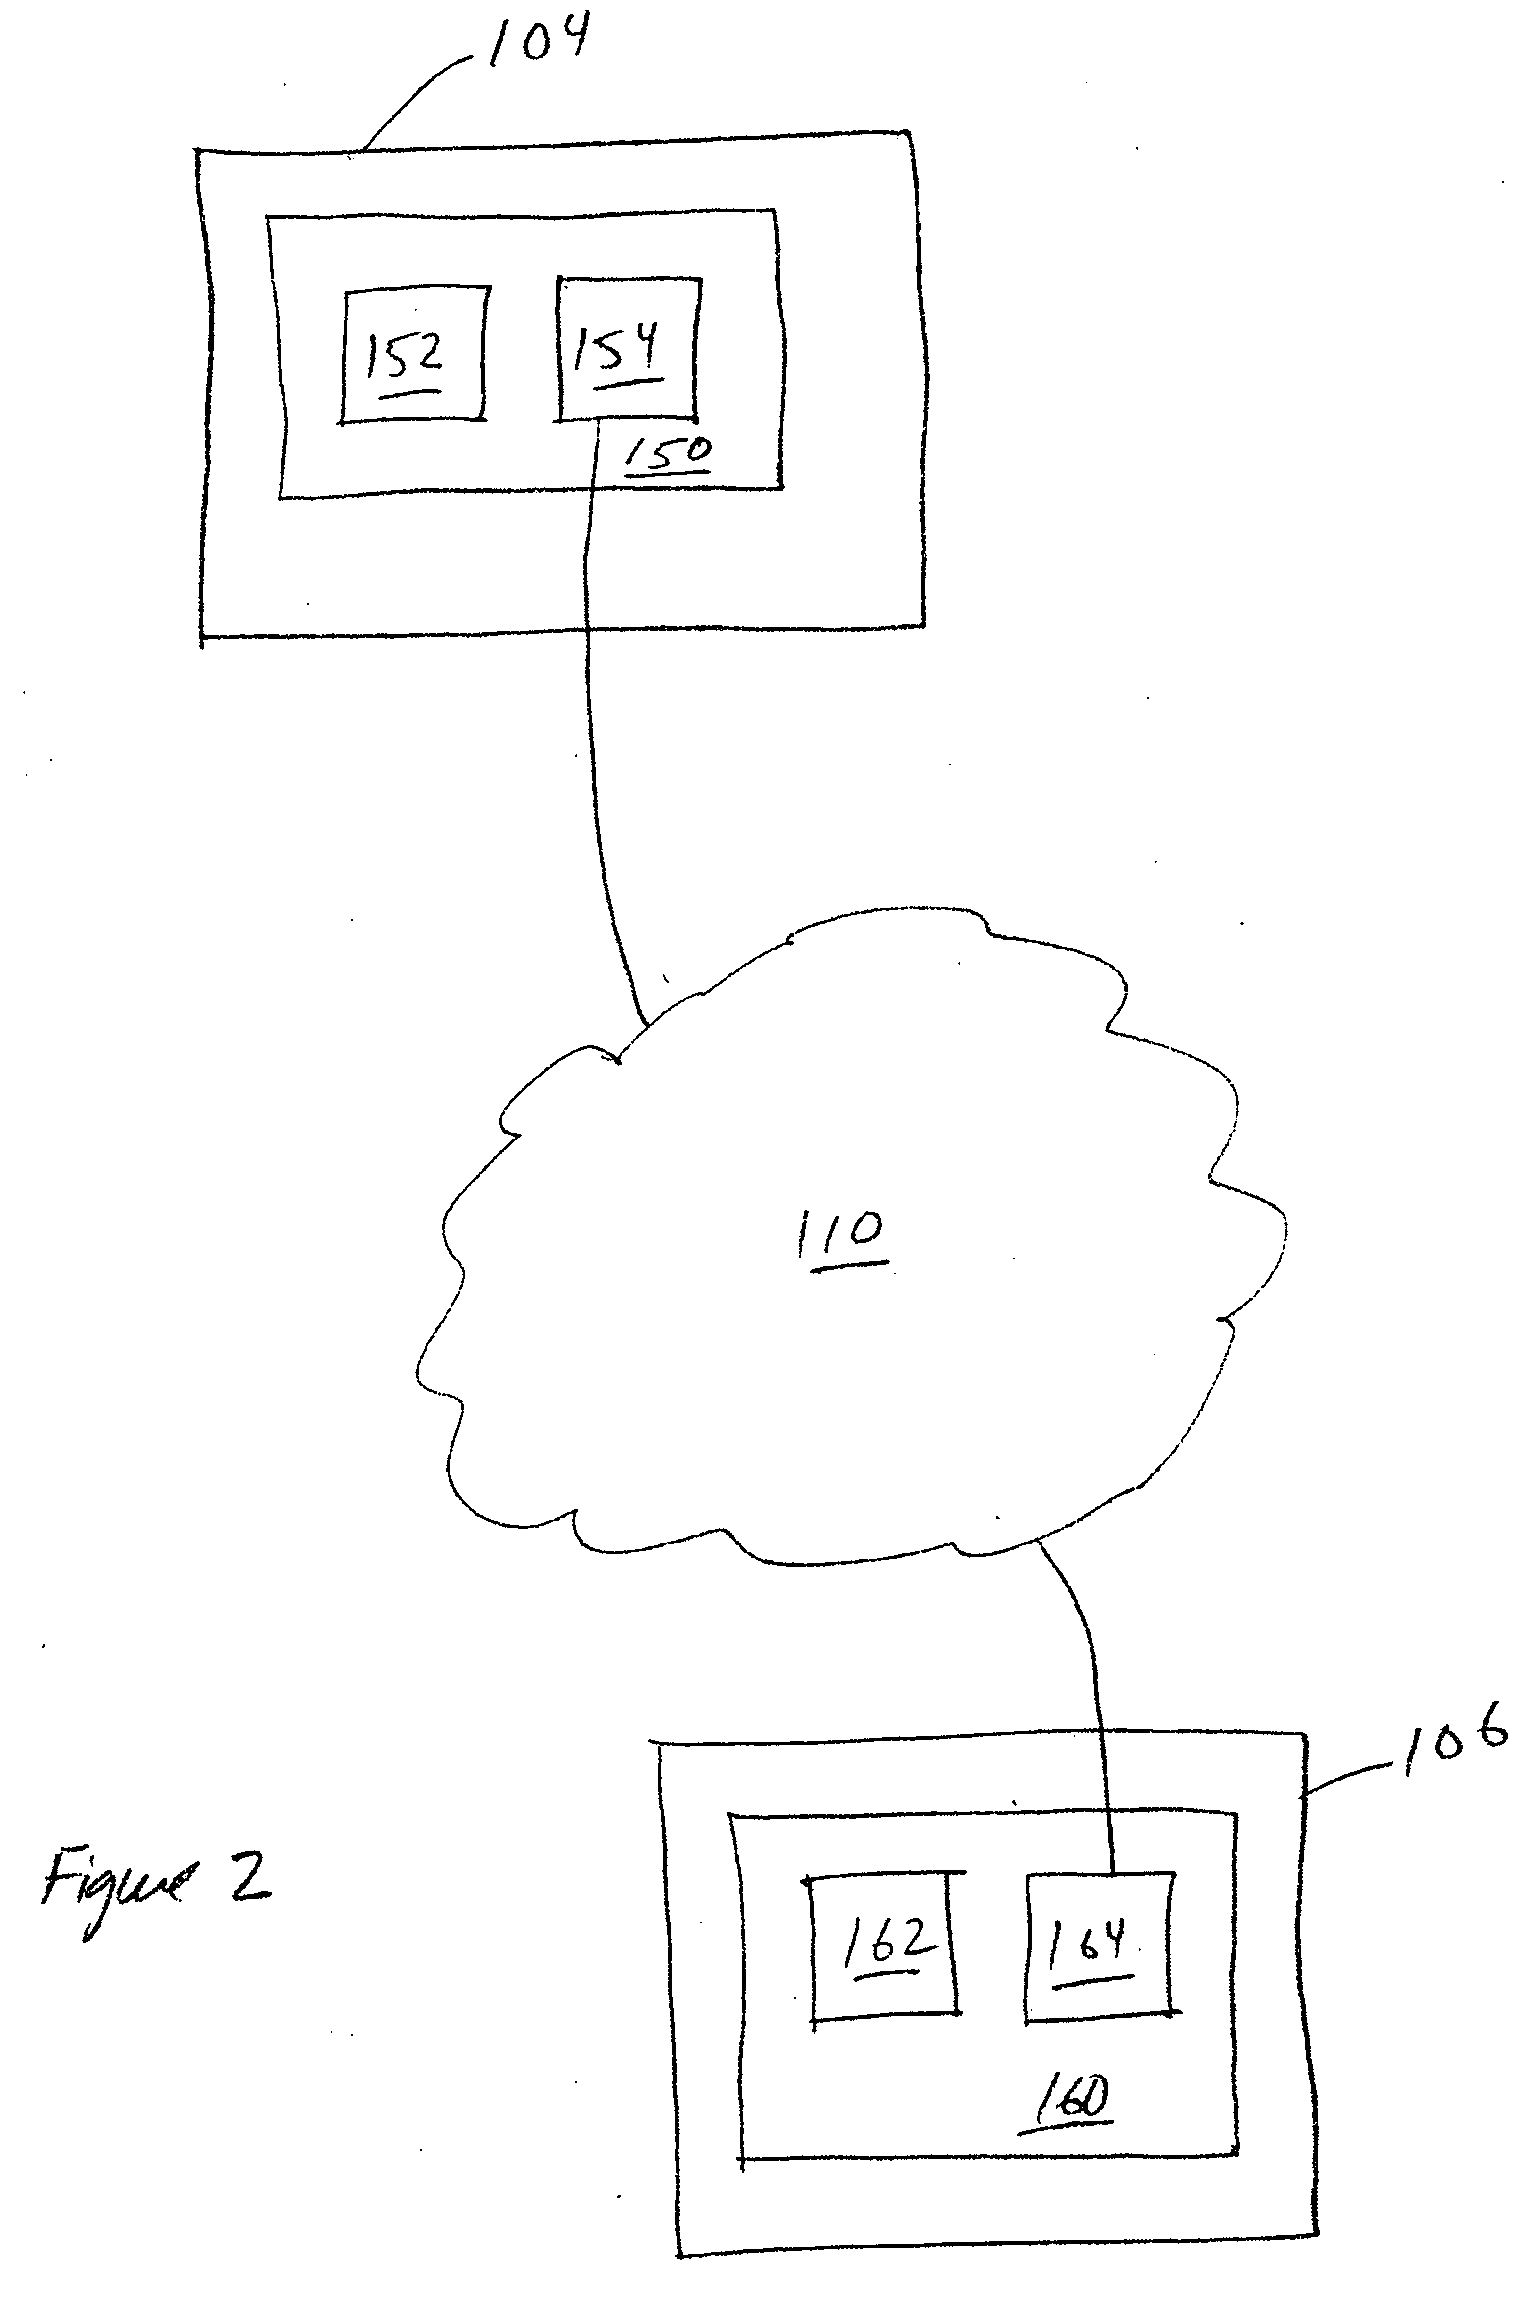 Systems and methods for interactively displaying product information and for collaborative product design